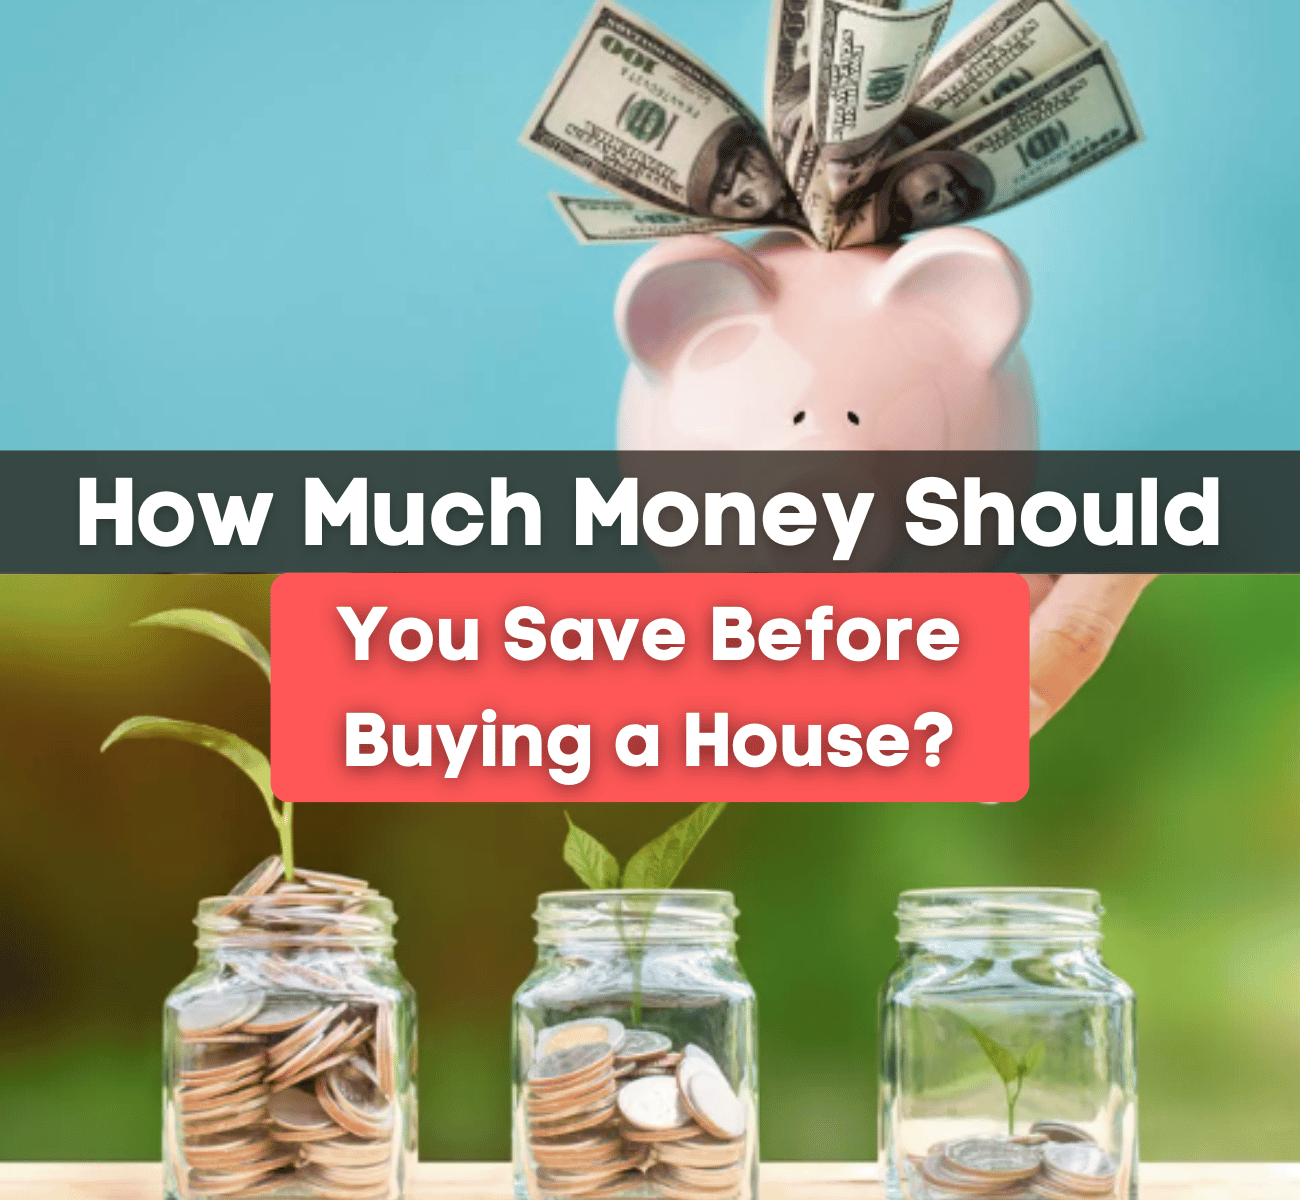 How Much Money Should You Save Before Buying a House?